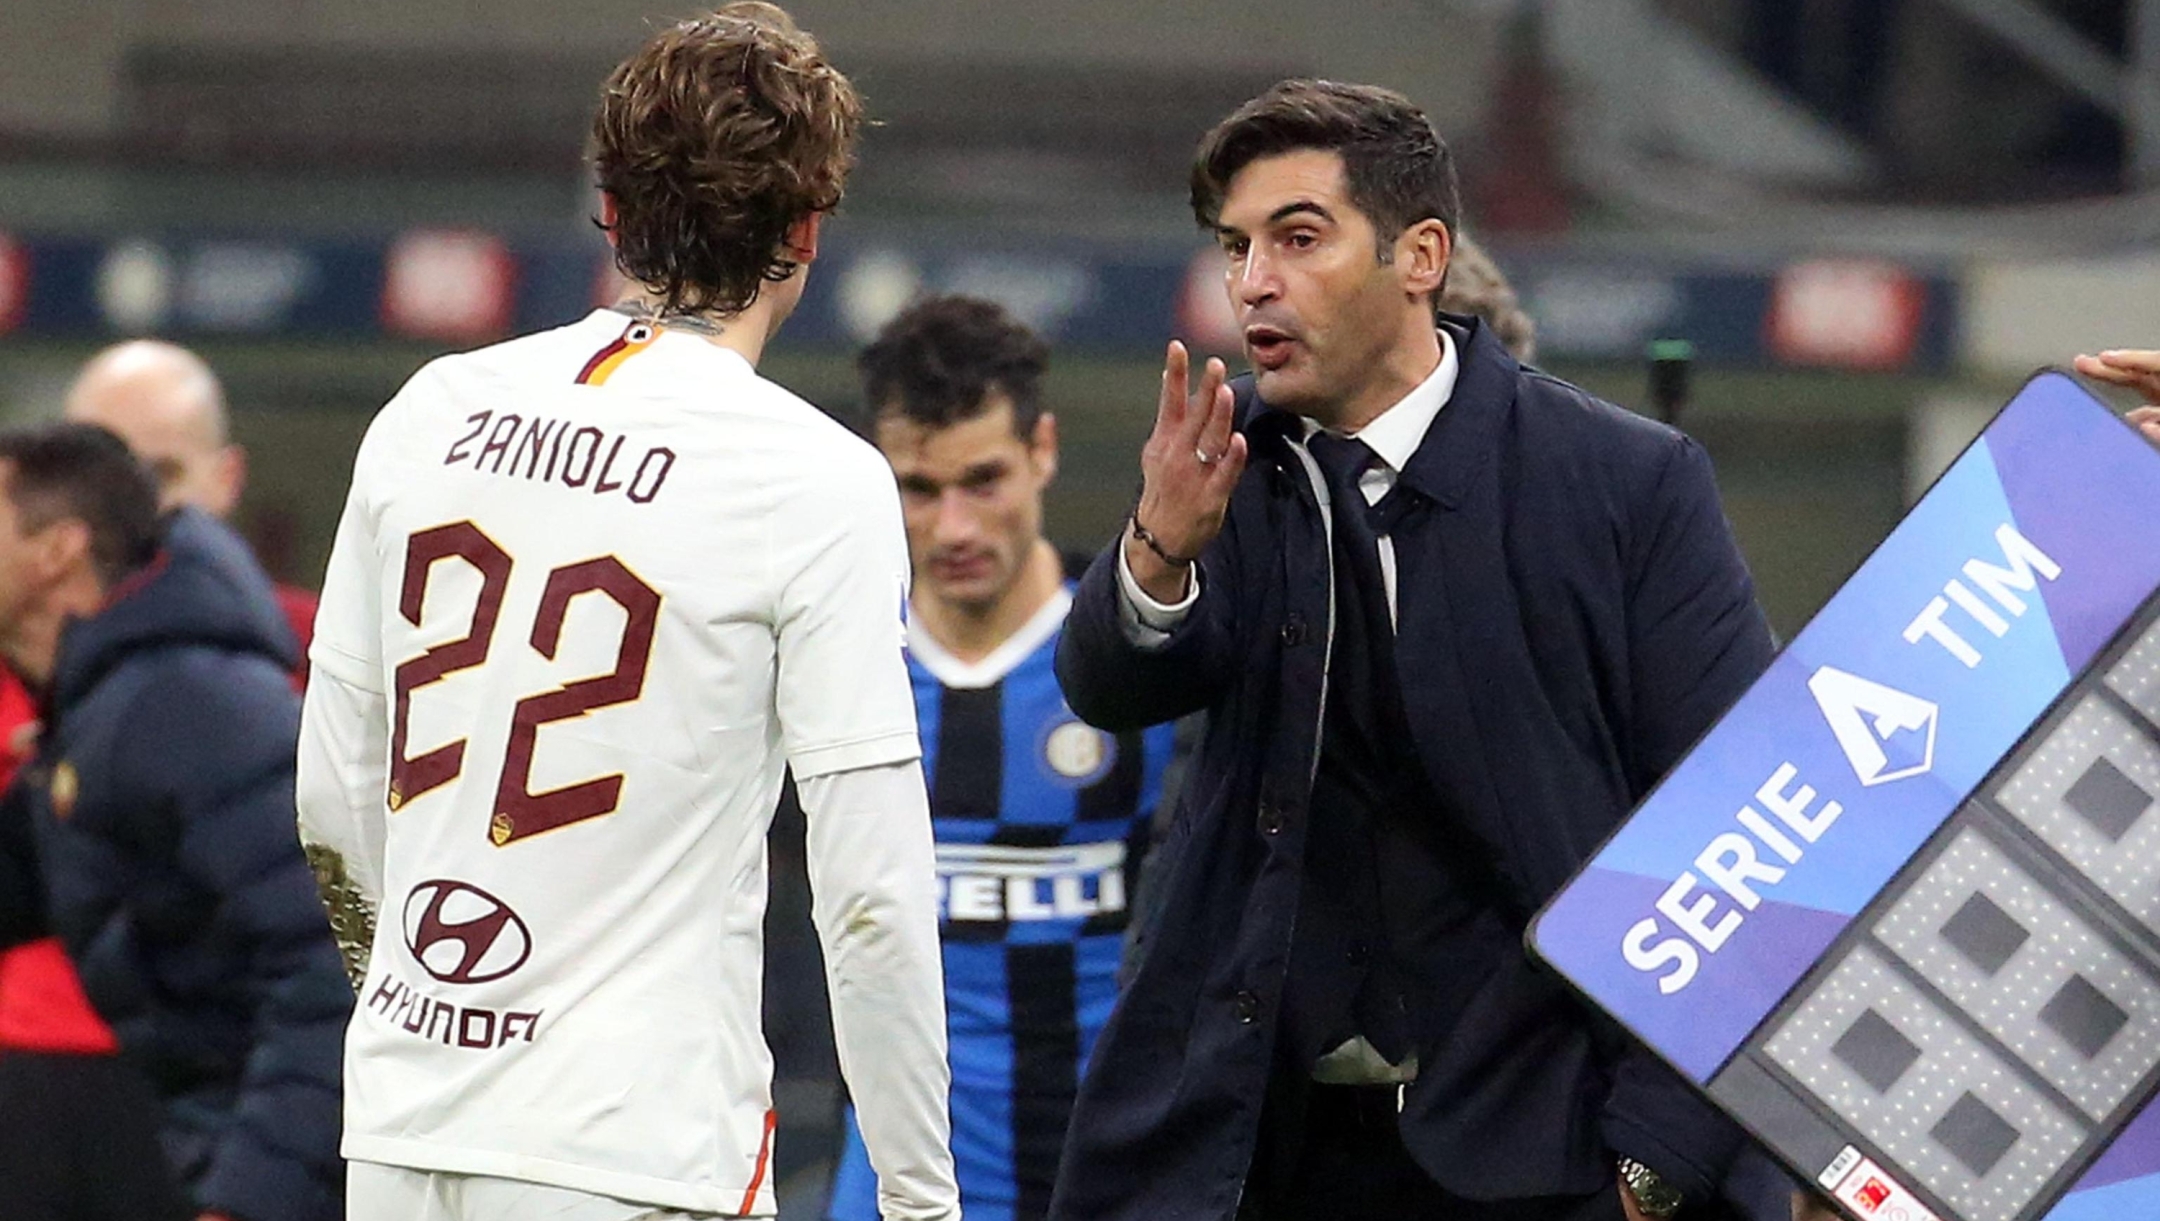 Roma's coach Paulo Fonseca (R) speaks with his midfielder Nicolo Zaniolo during the Italian Serie A soccer match Inter FC vs AS Roma at the Giuseppe Meazza stadium in Milan, Italy, 06 December 2019.
ANSA/MATTEO BAZZI